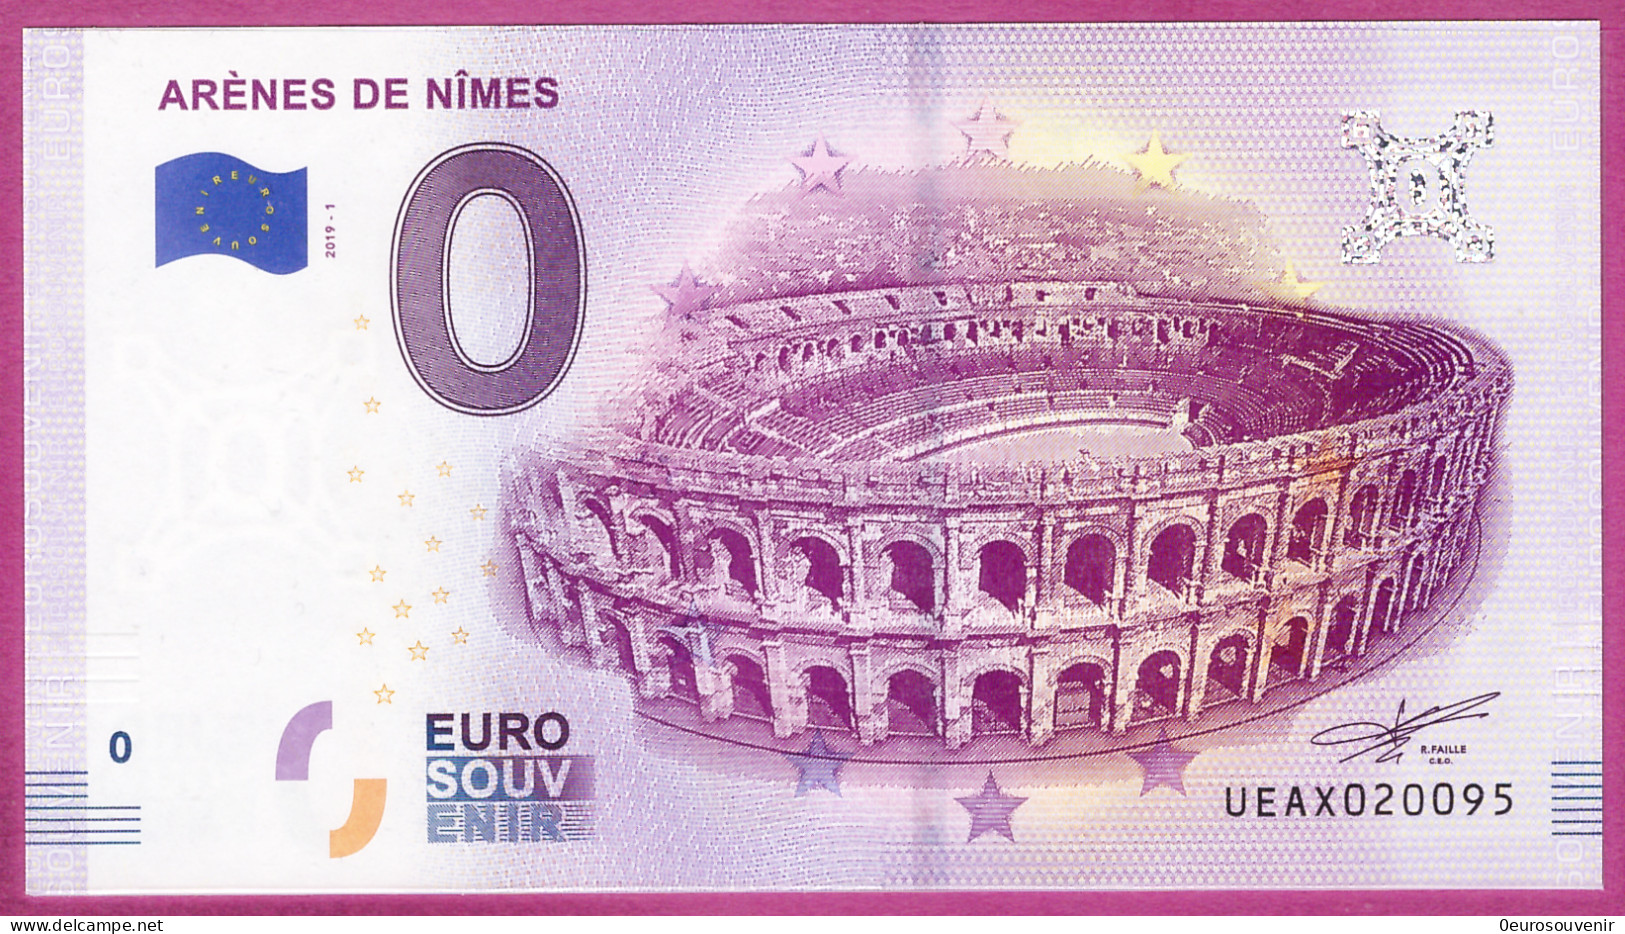 0-Euro UEAX 2019-1 ARENES DE NIMES - Private Proofs / Unofficial